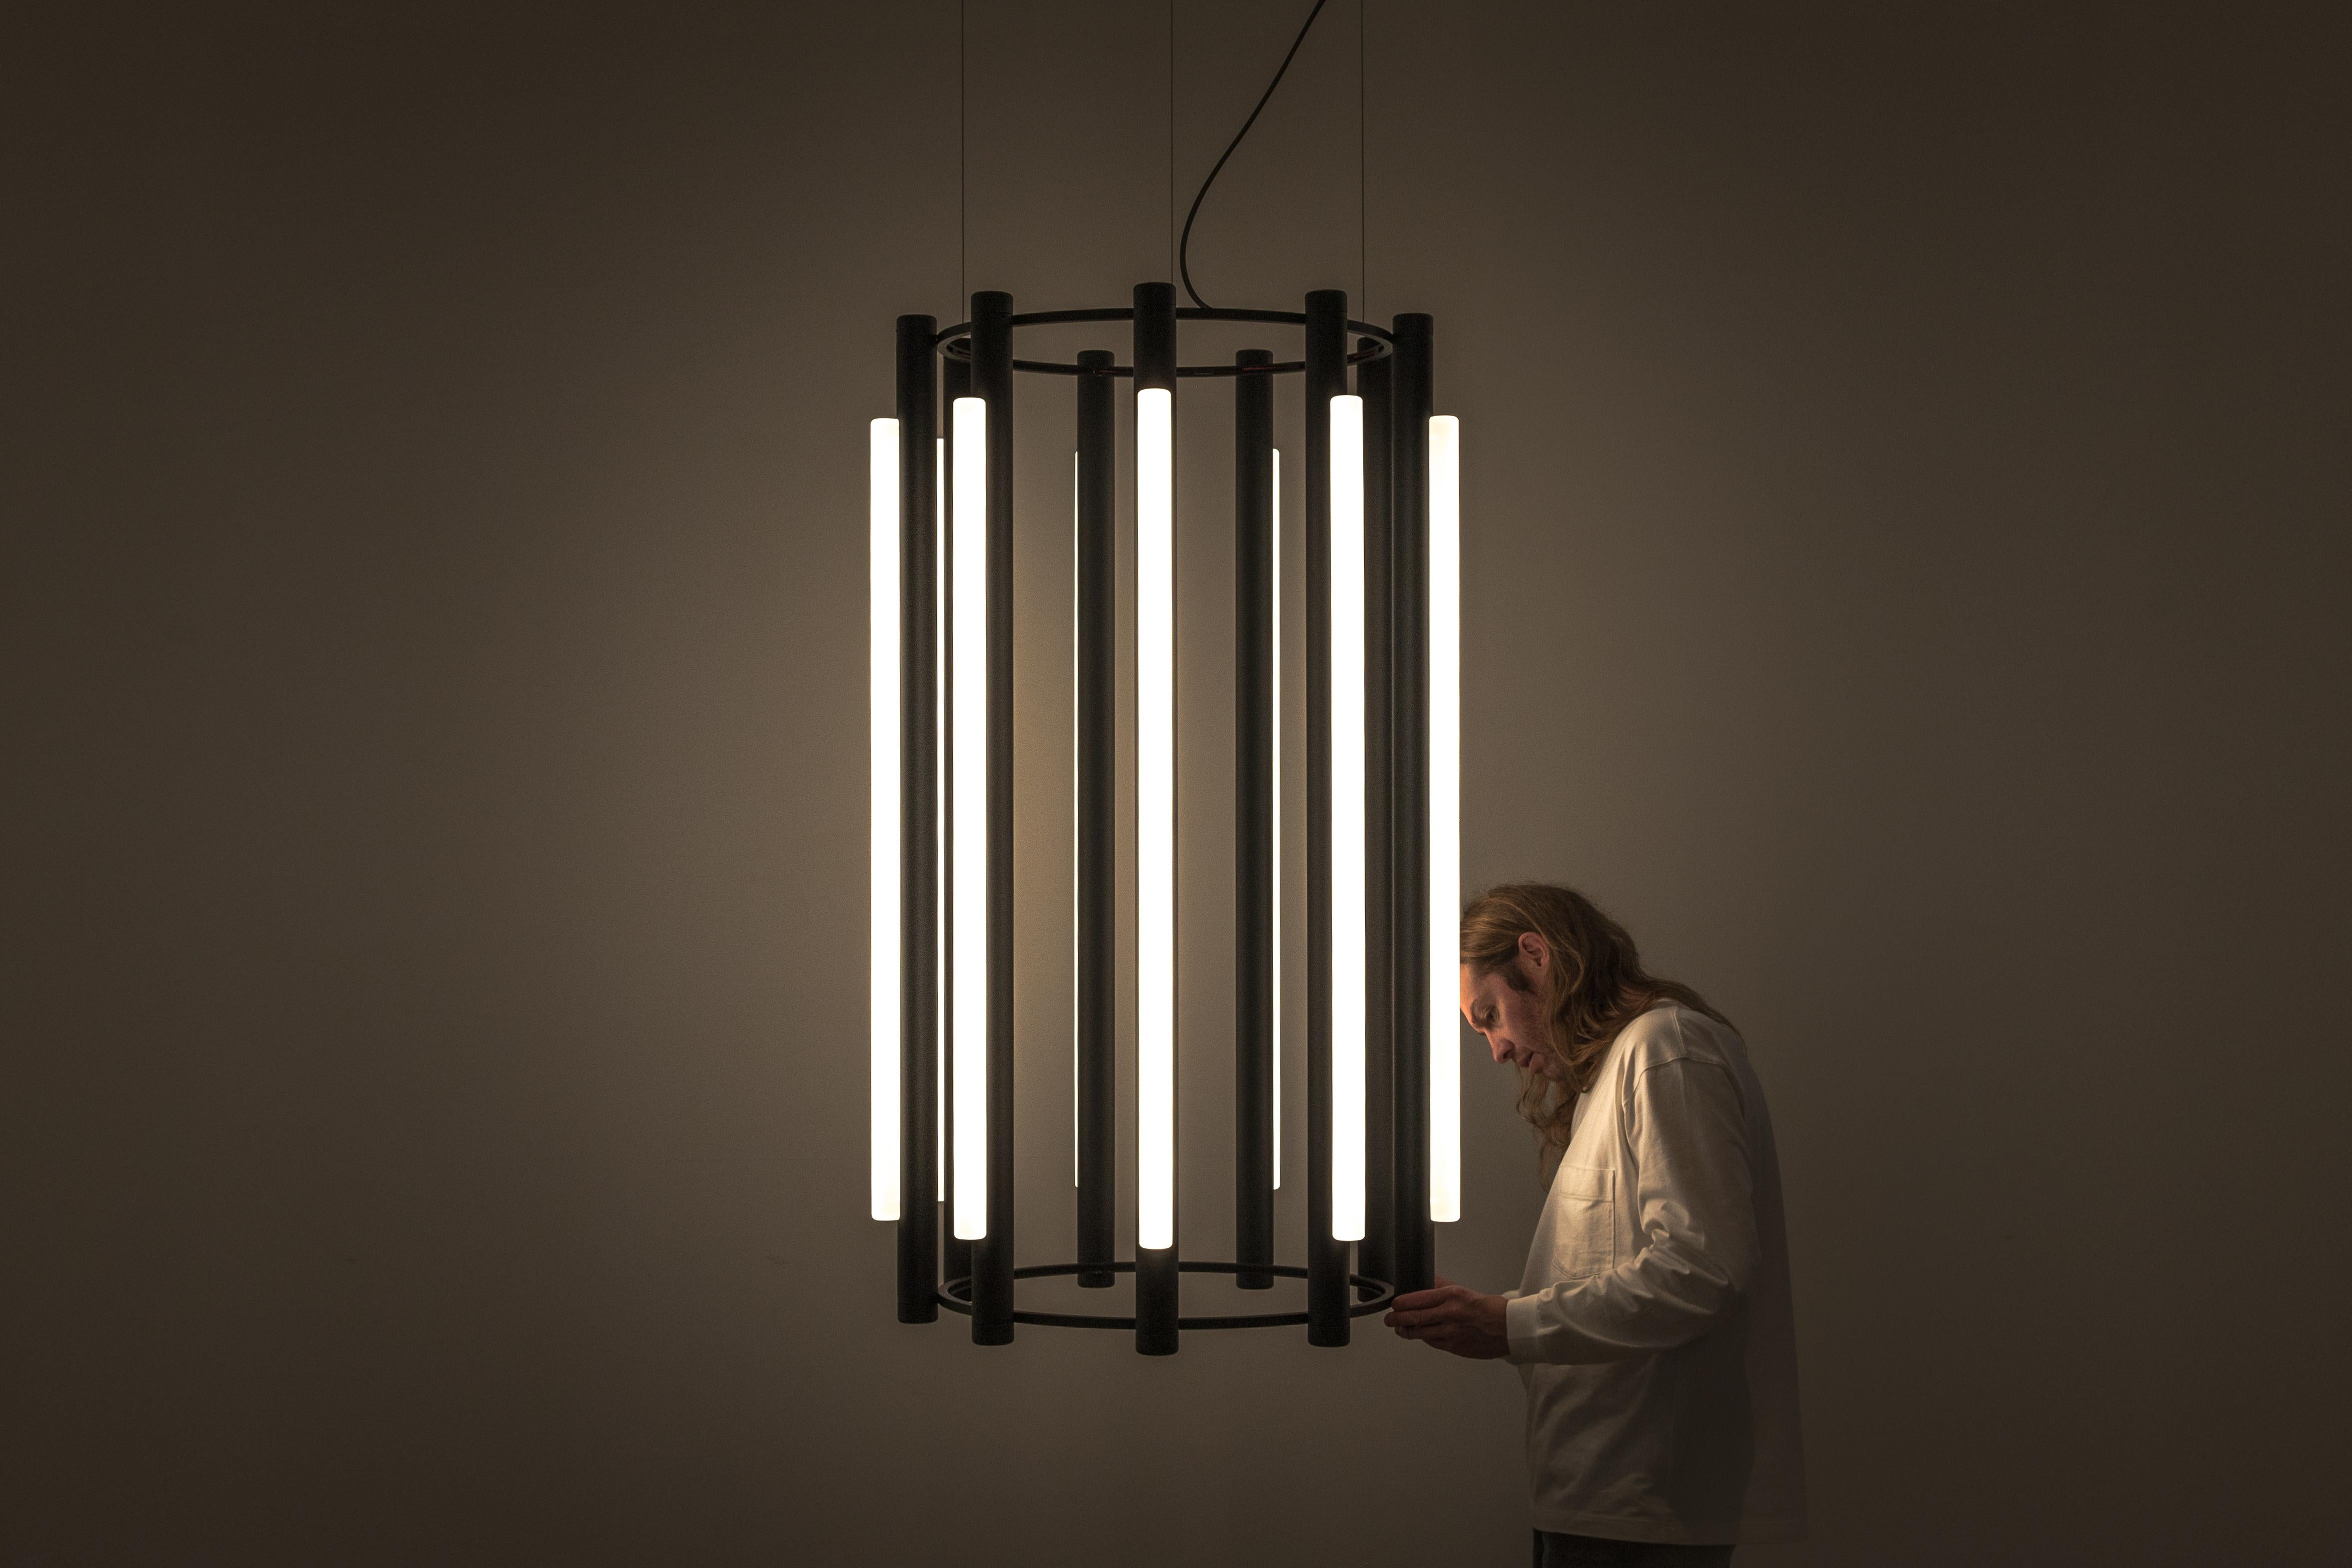 Pipeline chandelier 6
Design: Caine Heintzman, Editor: AND Light

By definition, the Pipeline Chandelier features a cylindrical arrangement of linear illuminated sections cinched by metal hoops. Its carousel like form proposes an unconventional